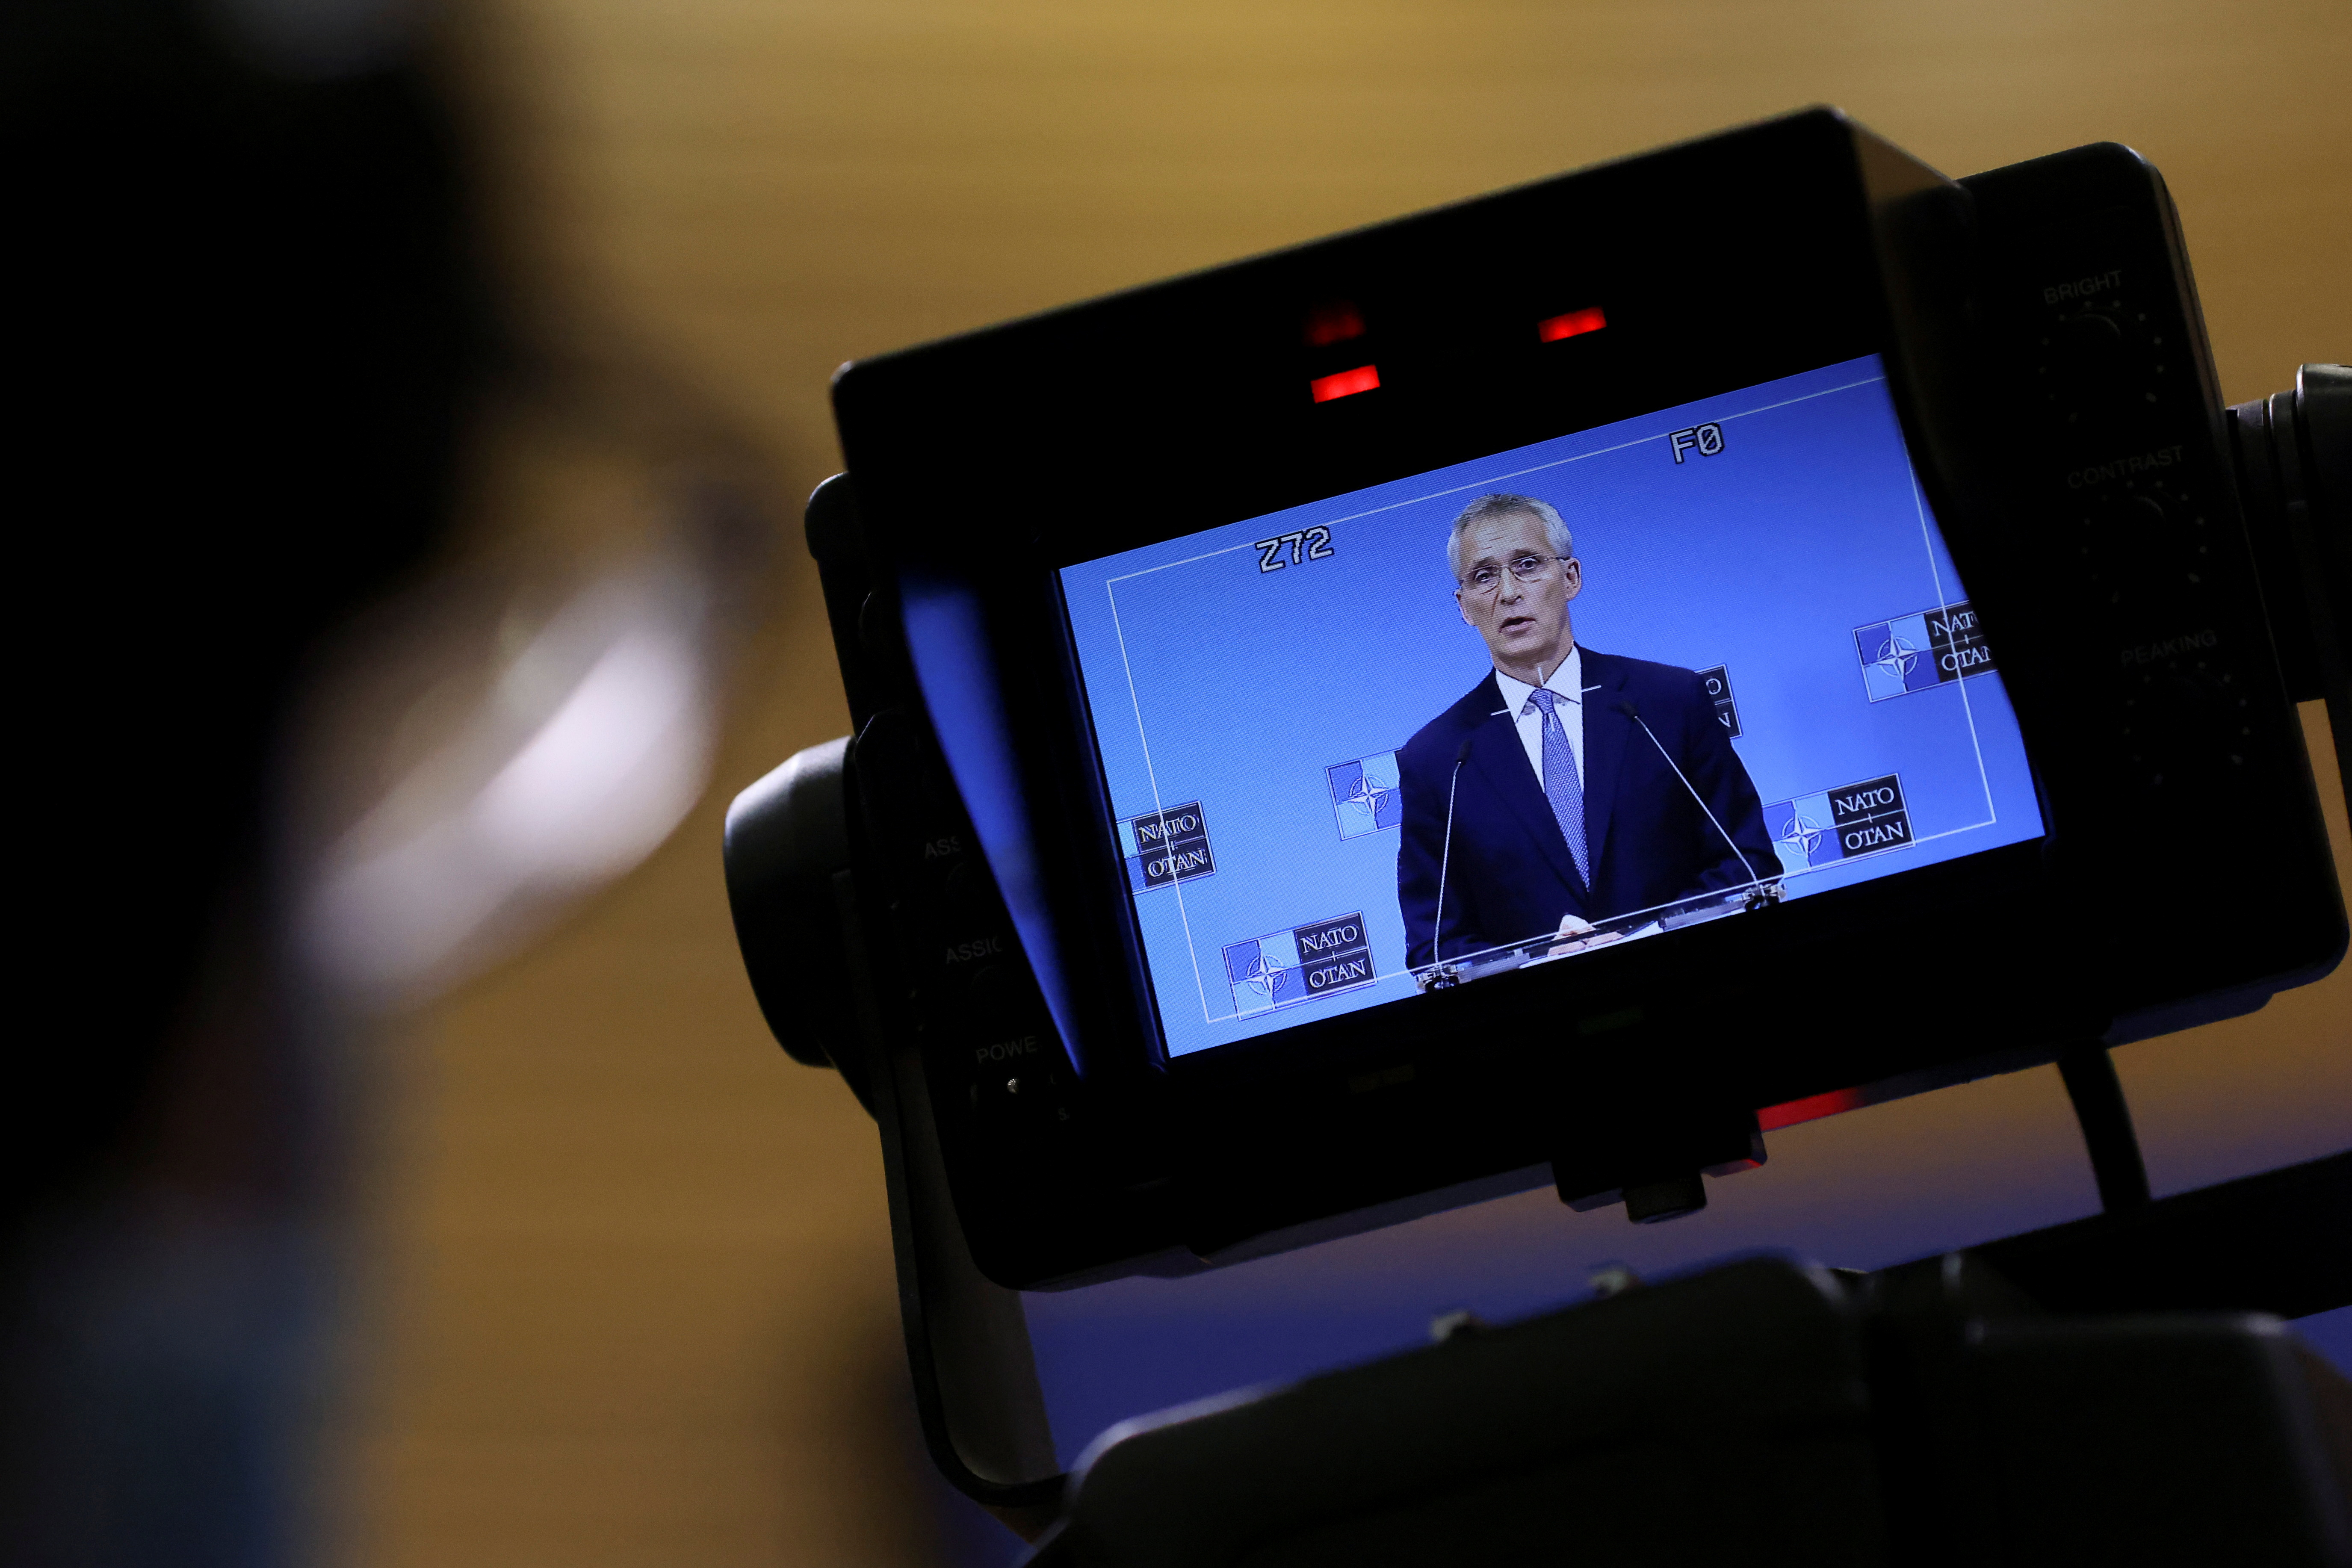 A member of the media records NATO Secretary General Jens Stoltenberg as he speaks during a news conference ahead of a meeting of NATO defence ministers at the alliance's headquarters in Brussels, Belgium October 20, 2021. REUTERS/Yves Herman